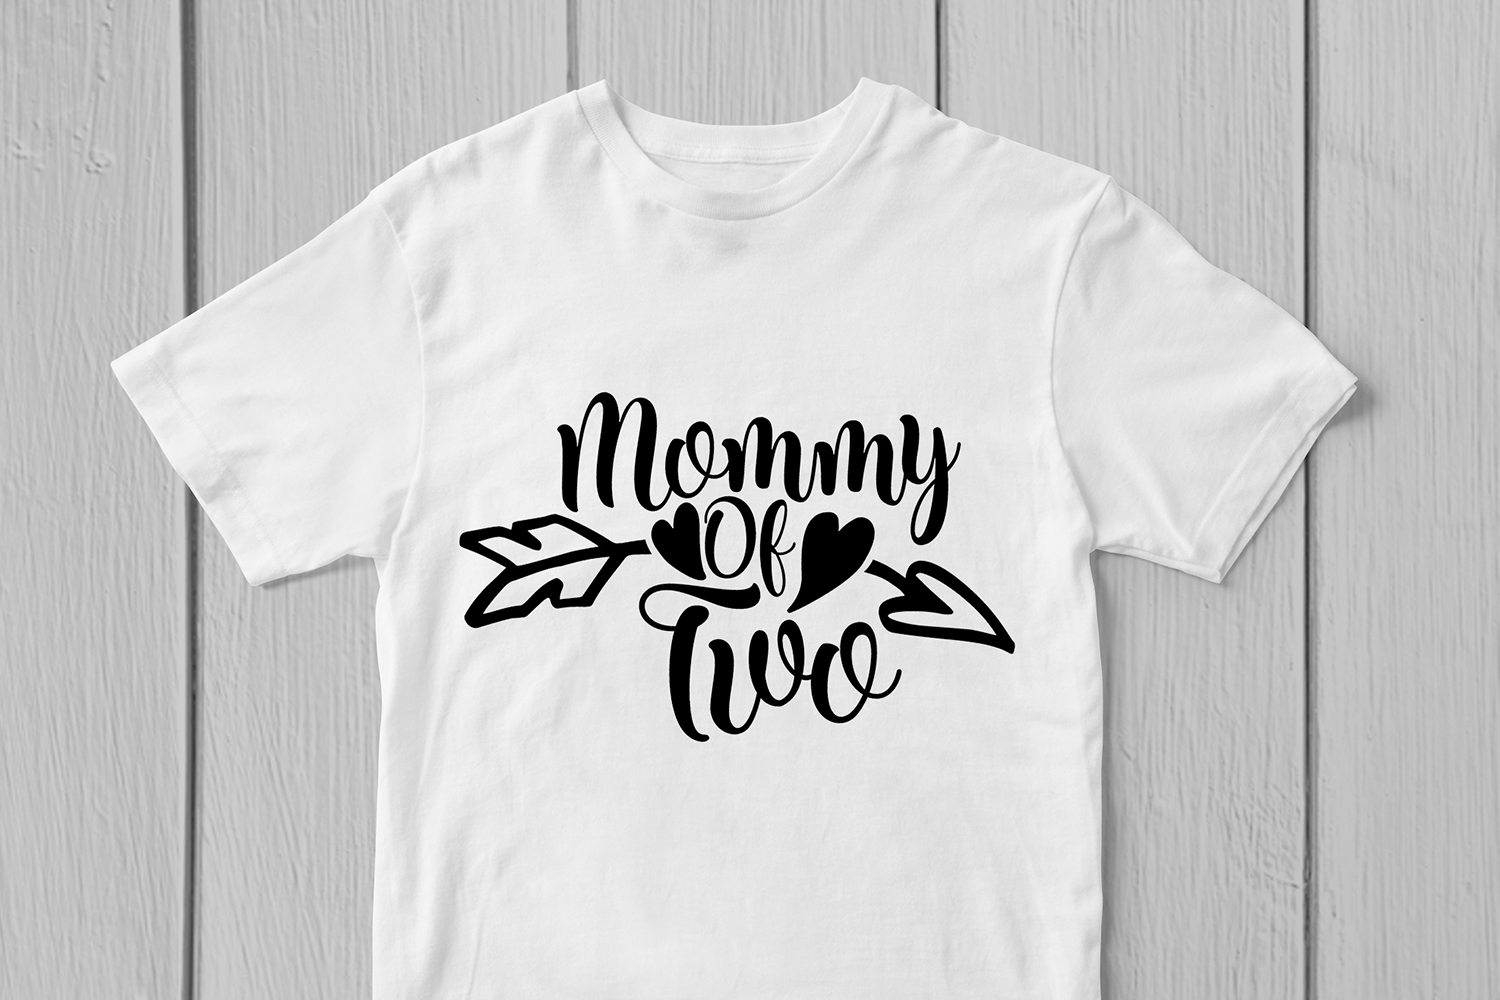 Download Mommy Of Two - Mother SVG EPS DXF PNG Cutting Files (92829) | Cut Files | Design Bundles